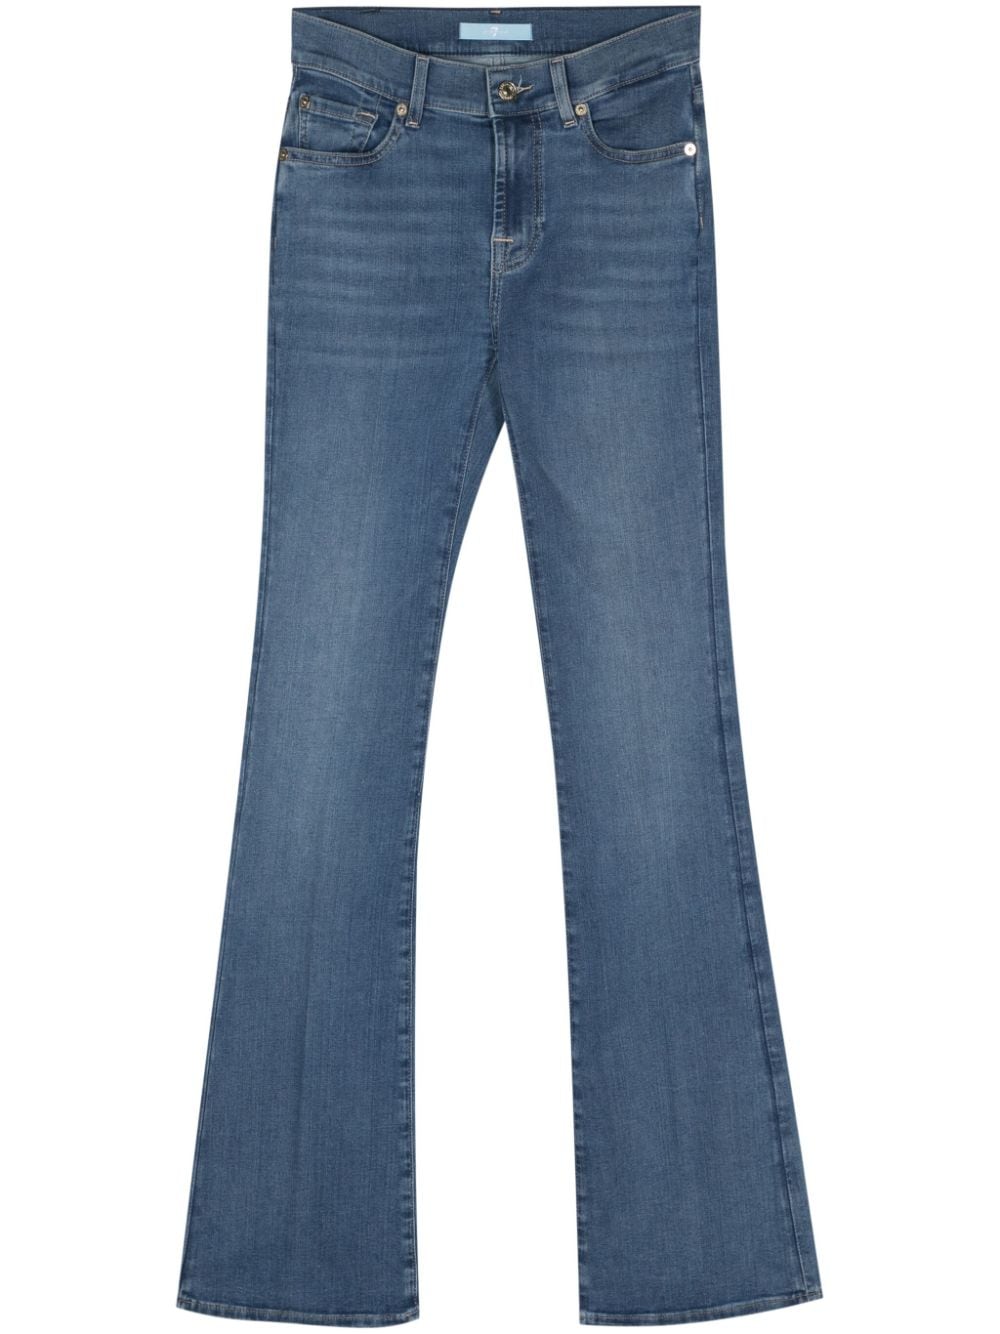 7 For All Mankind mid-rise bootcut jeans - Blue von 7 For All Mankind